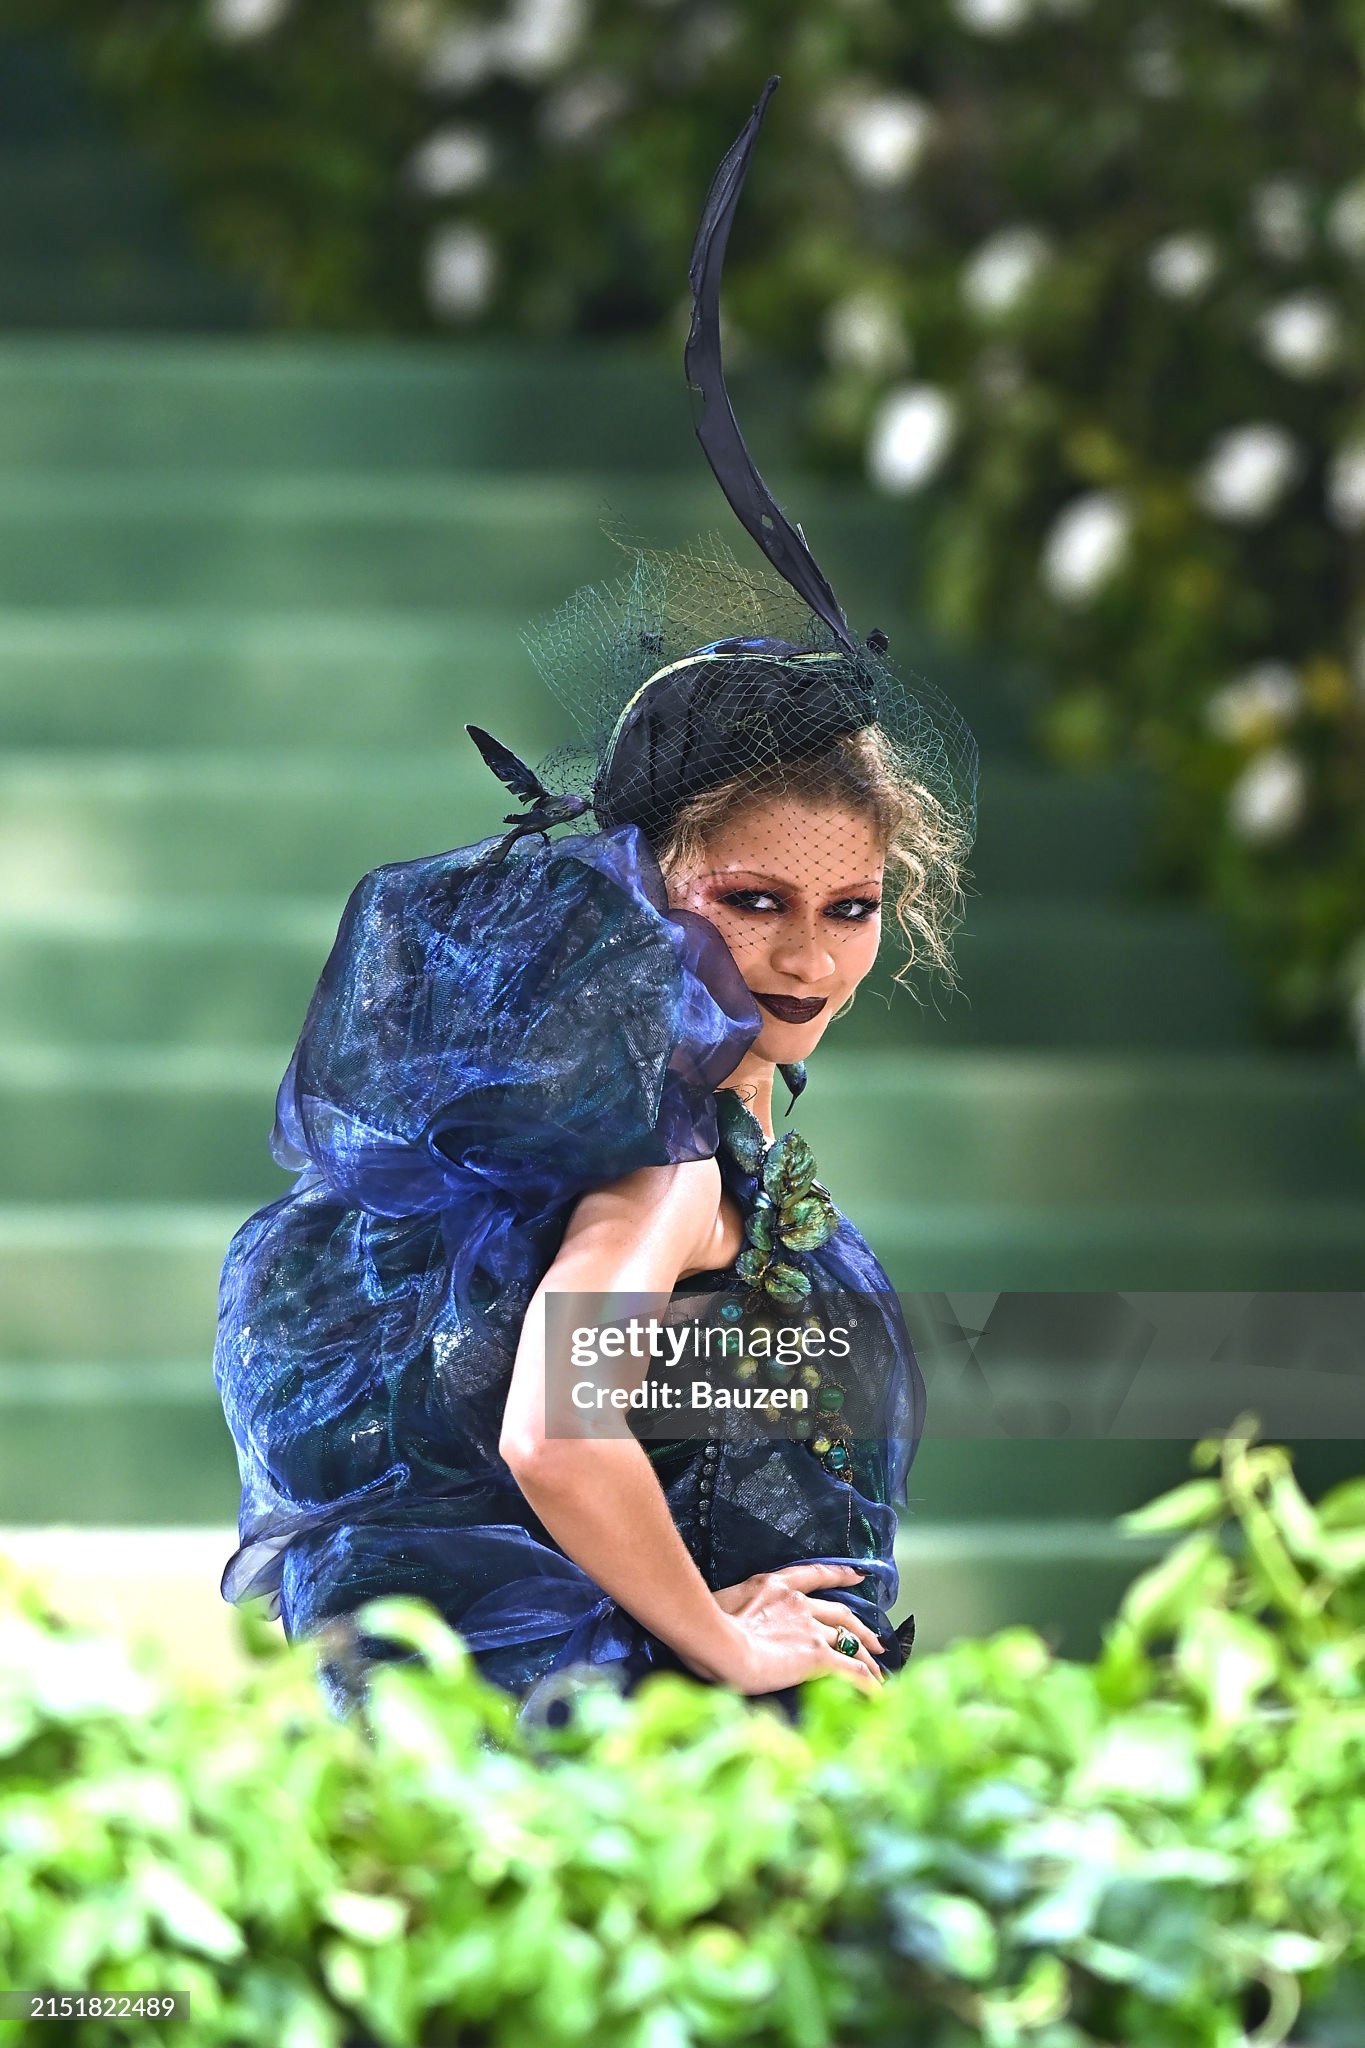 gettyimages-2151822489-2048x2048.jpg